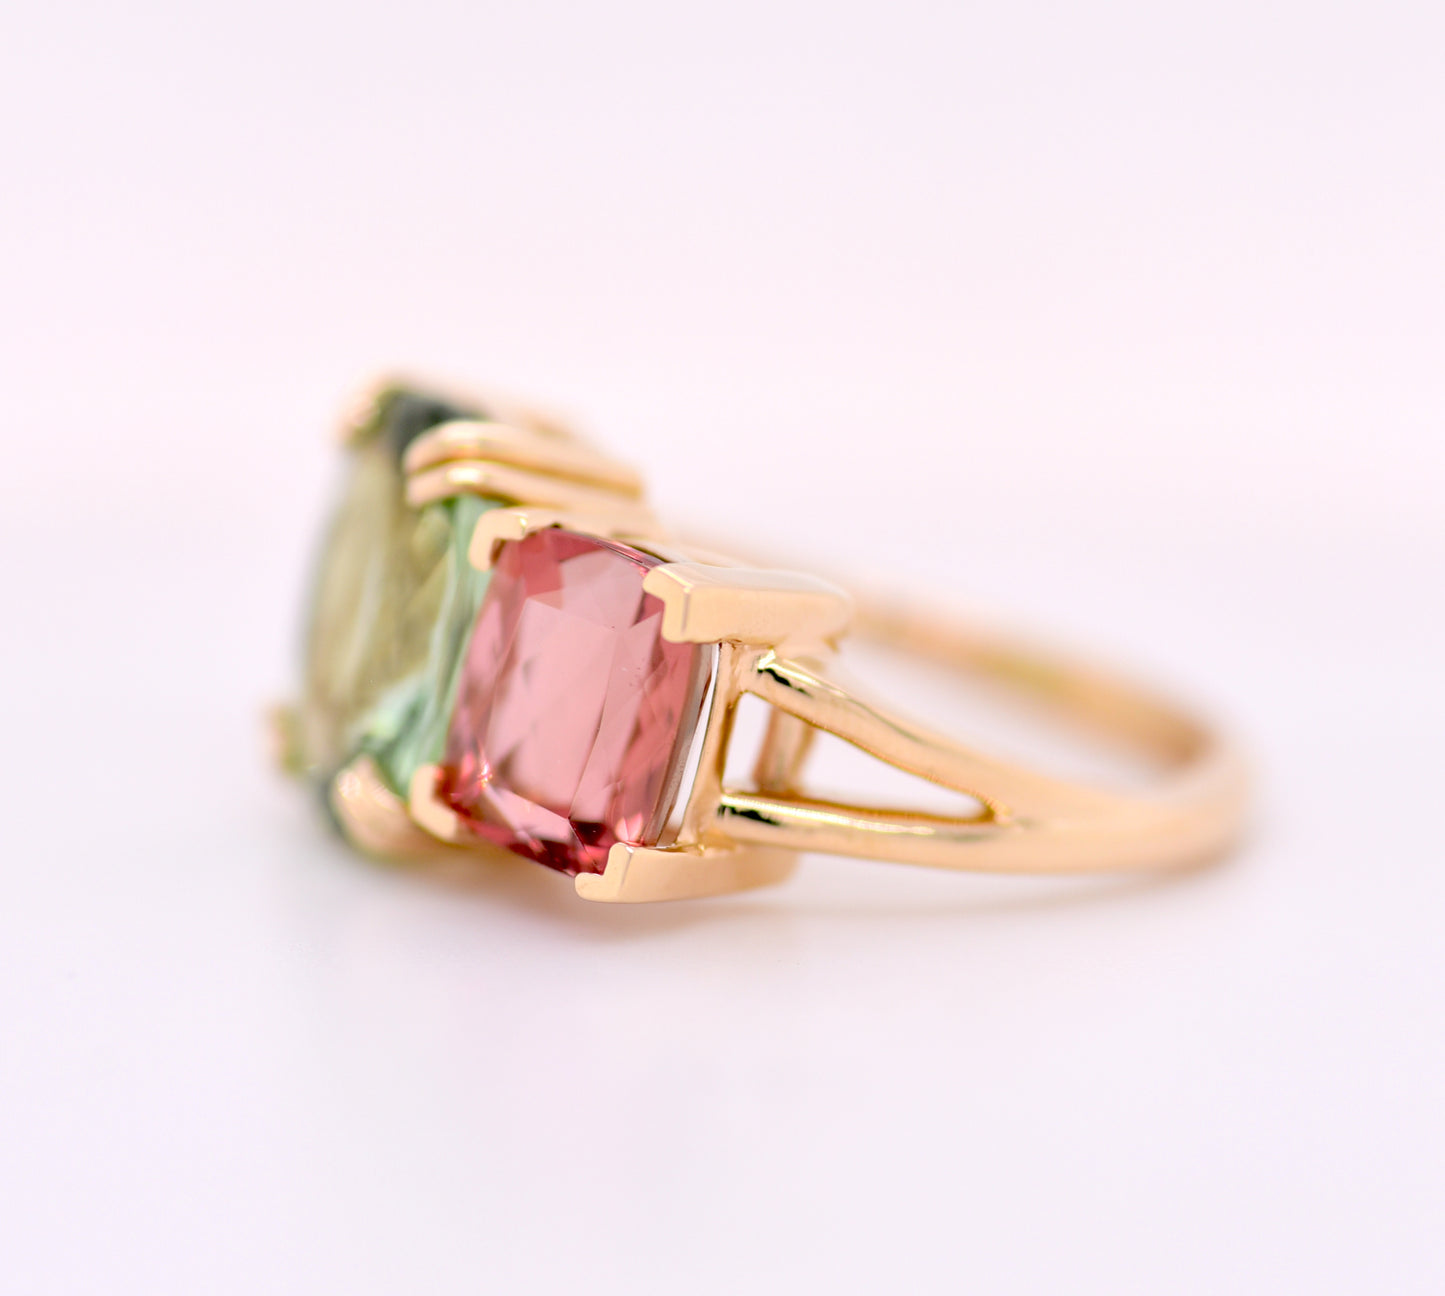 Better Together Ring (Pink & Green Tourmaline)